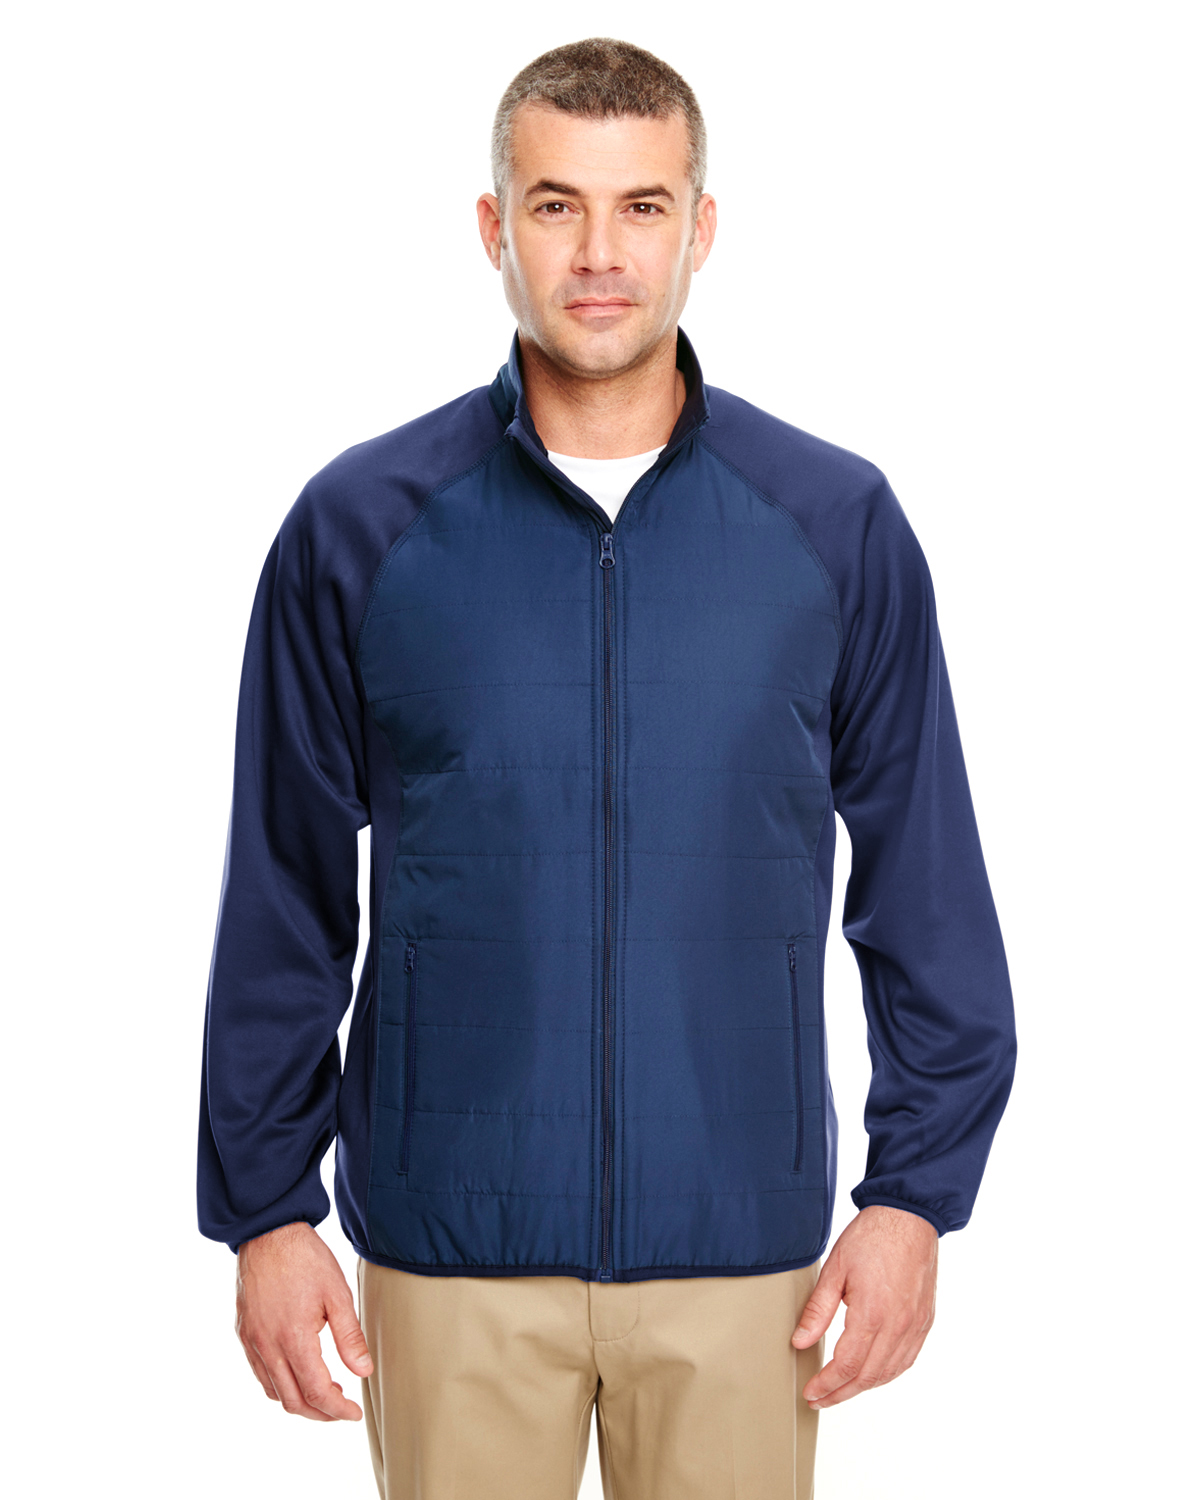 UltraClub Adult Cool & Dry Quilted Front Full-Zip Lightweight Jacket